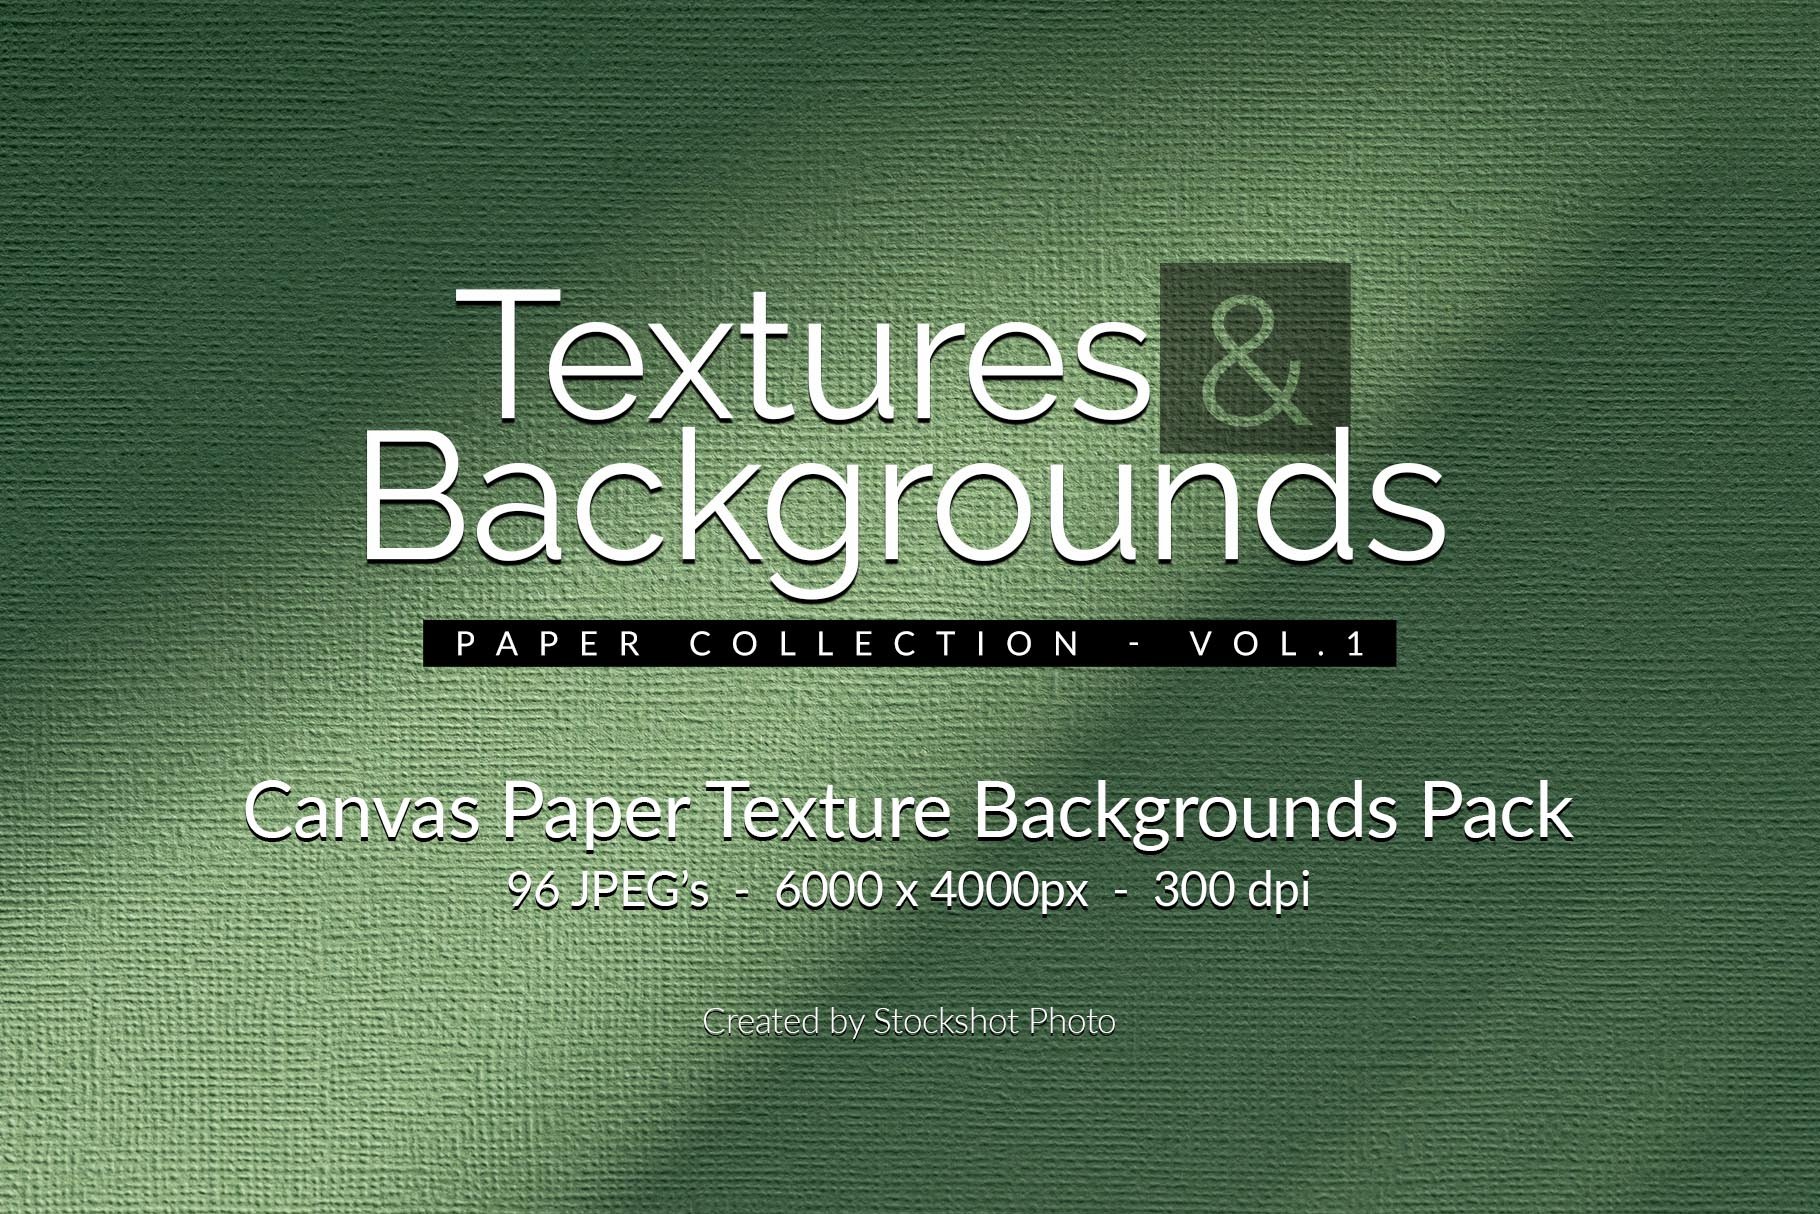 Canvas Paper Texture Background Pack cover image.